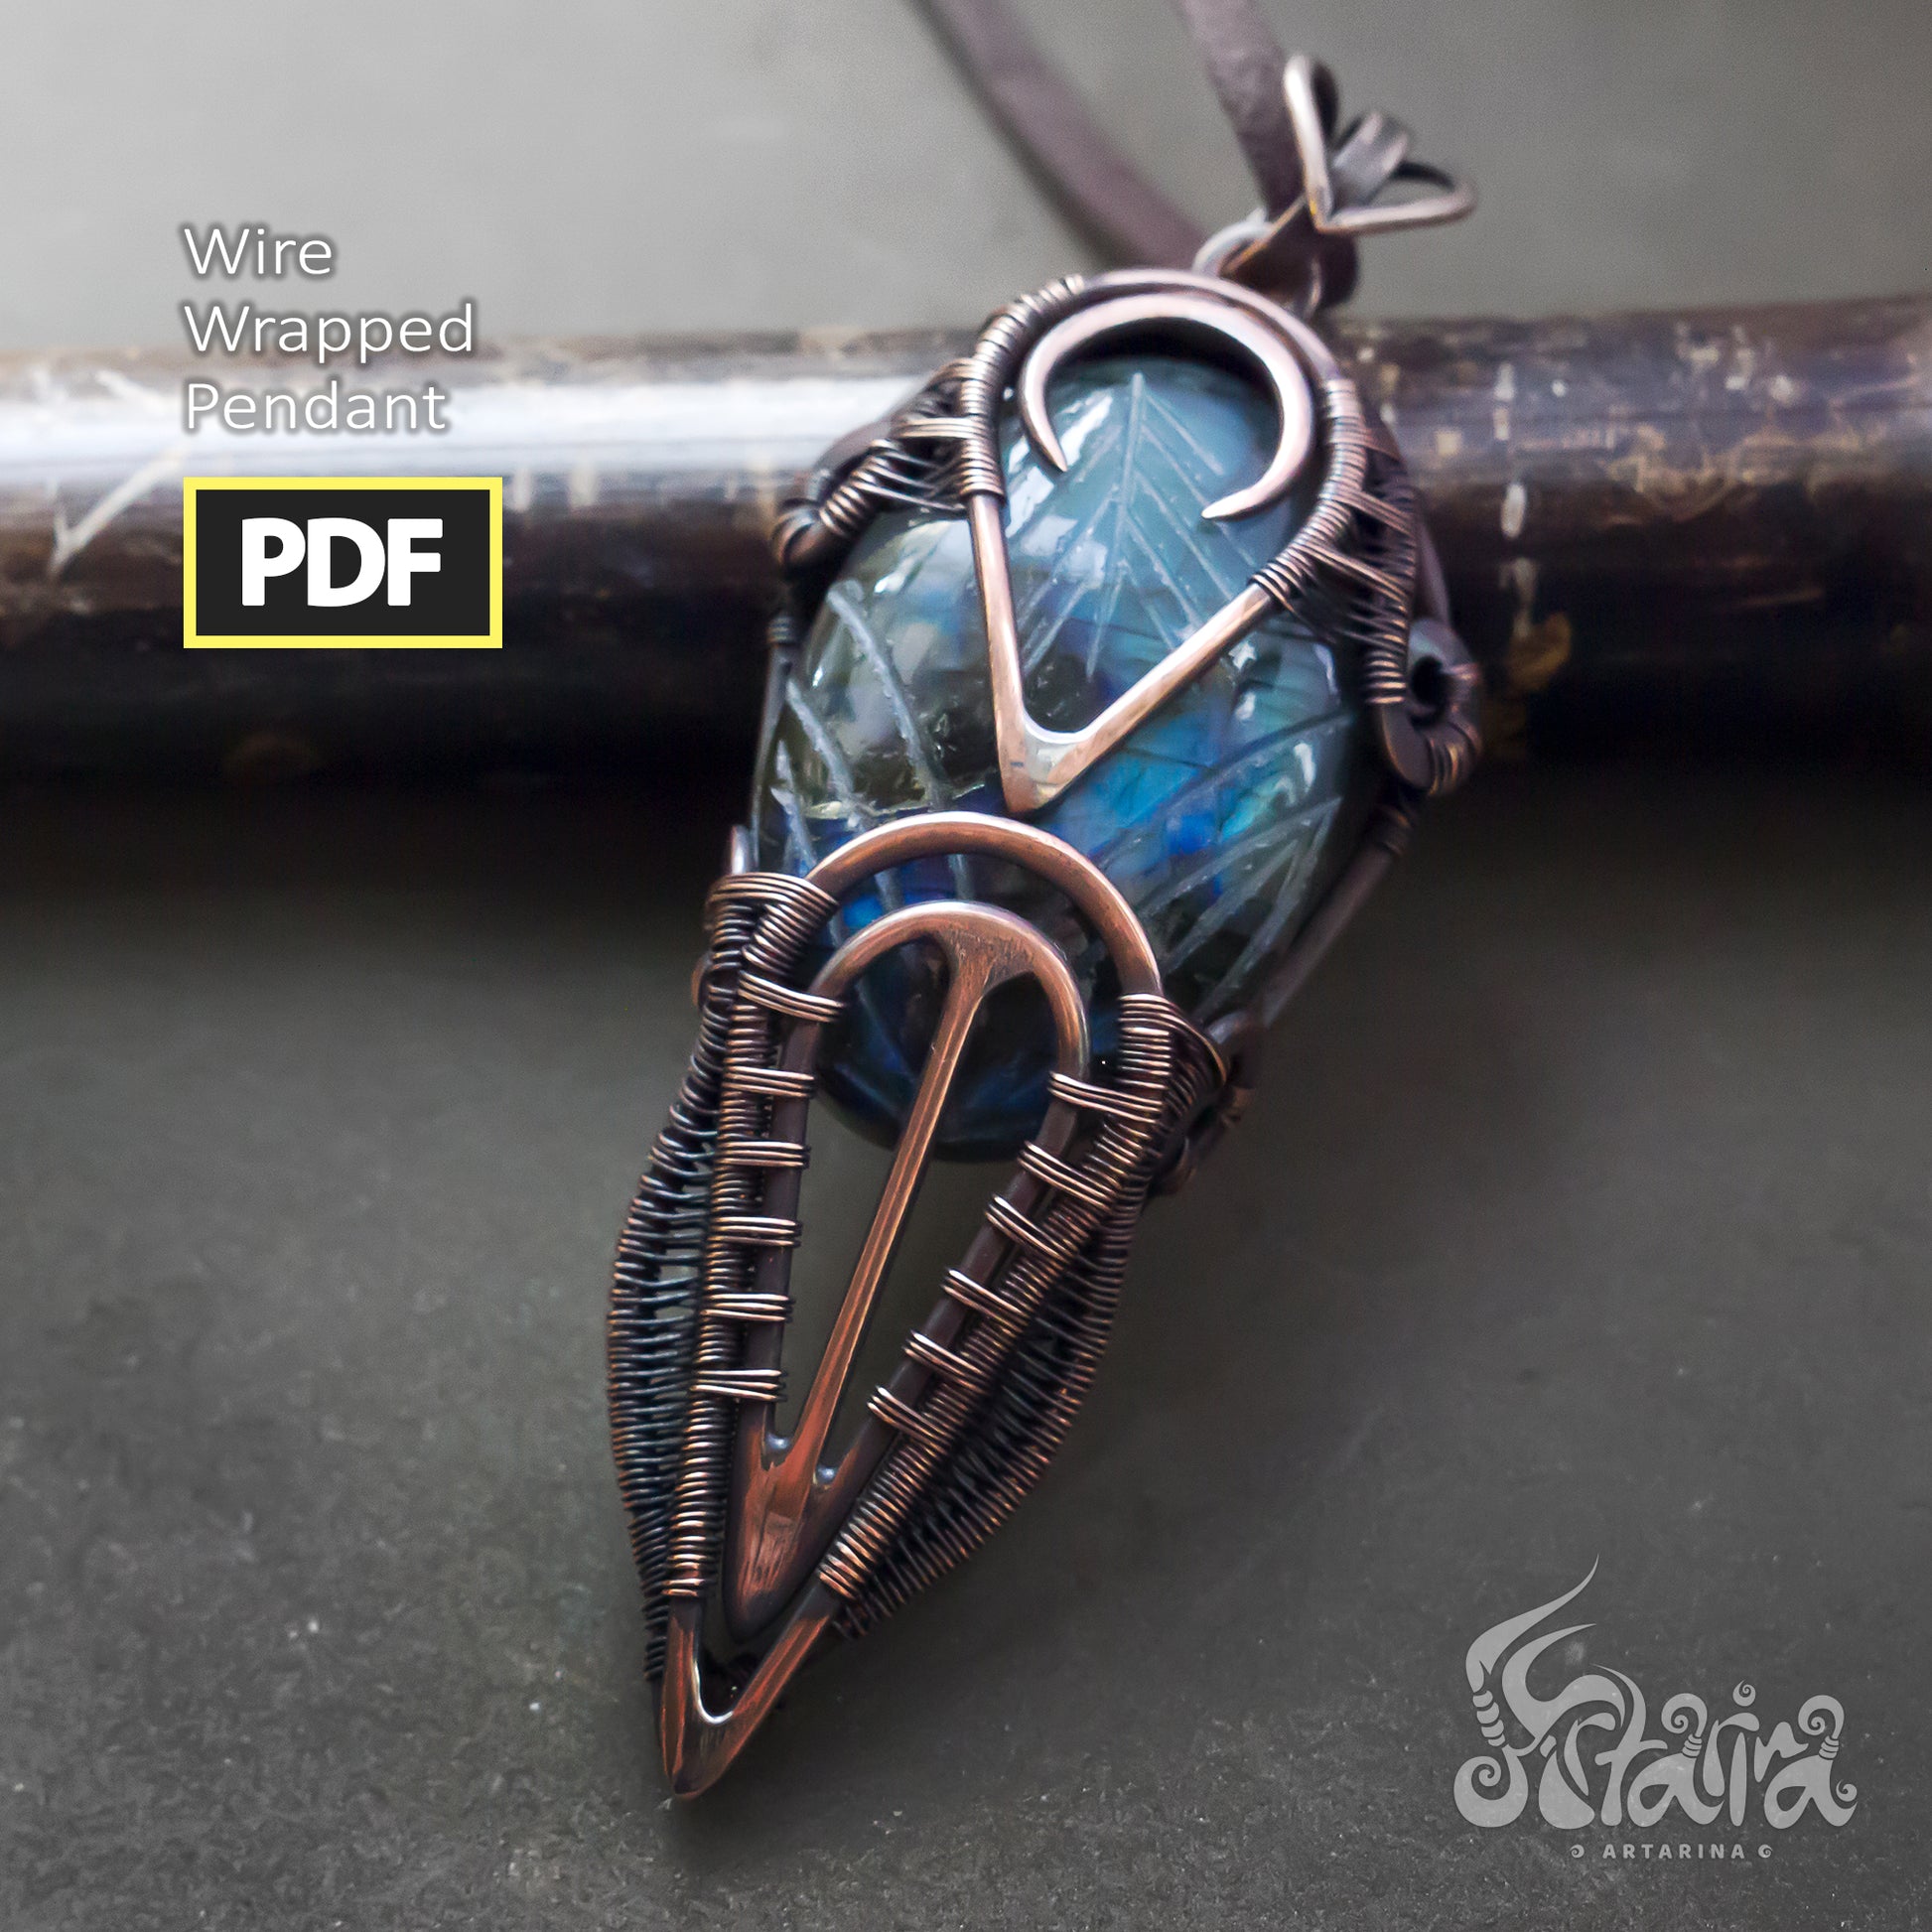 Wire wrapping necklace PDF tutorial | Step by step diy wire jewelry Artarina lesson | Advanced wire wrapping | See DESCRIPTION BELOW